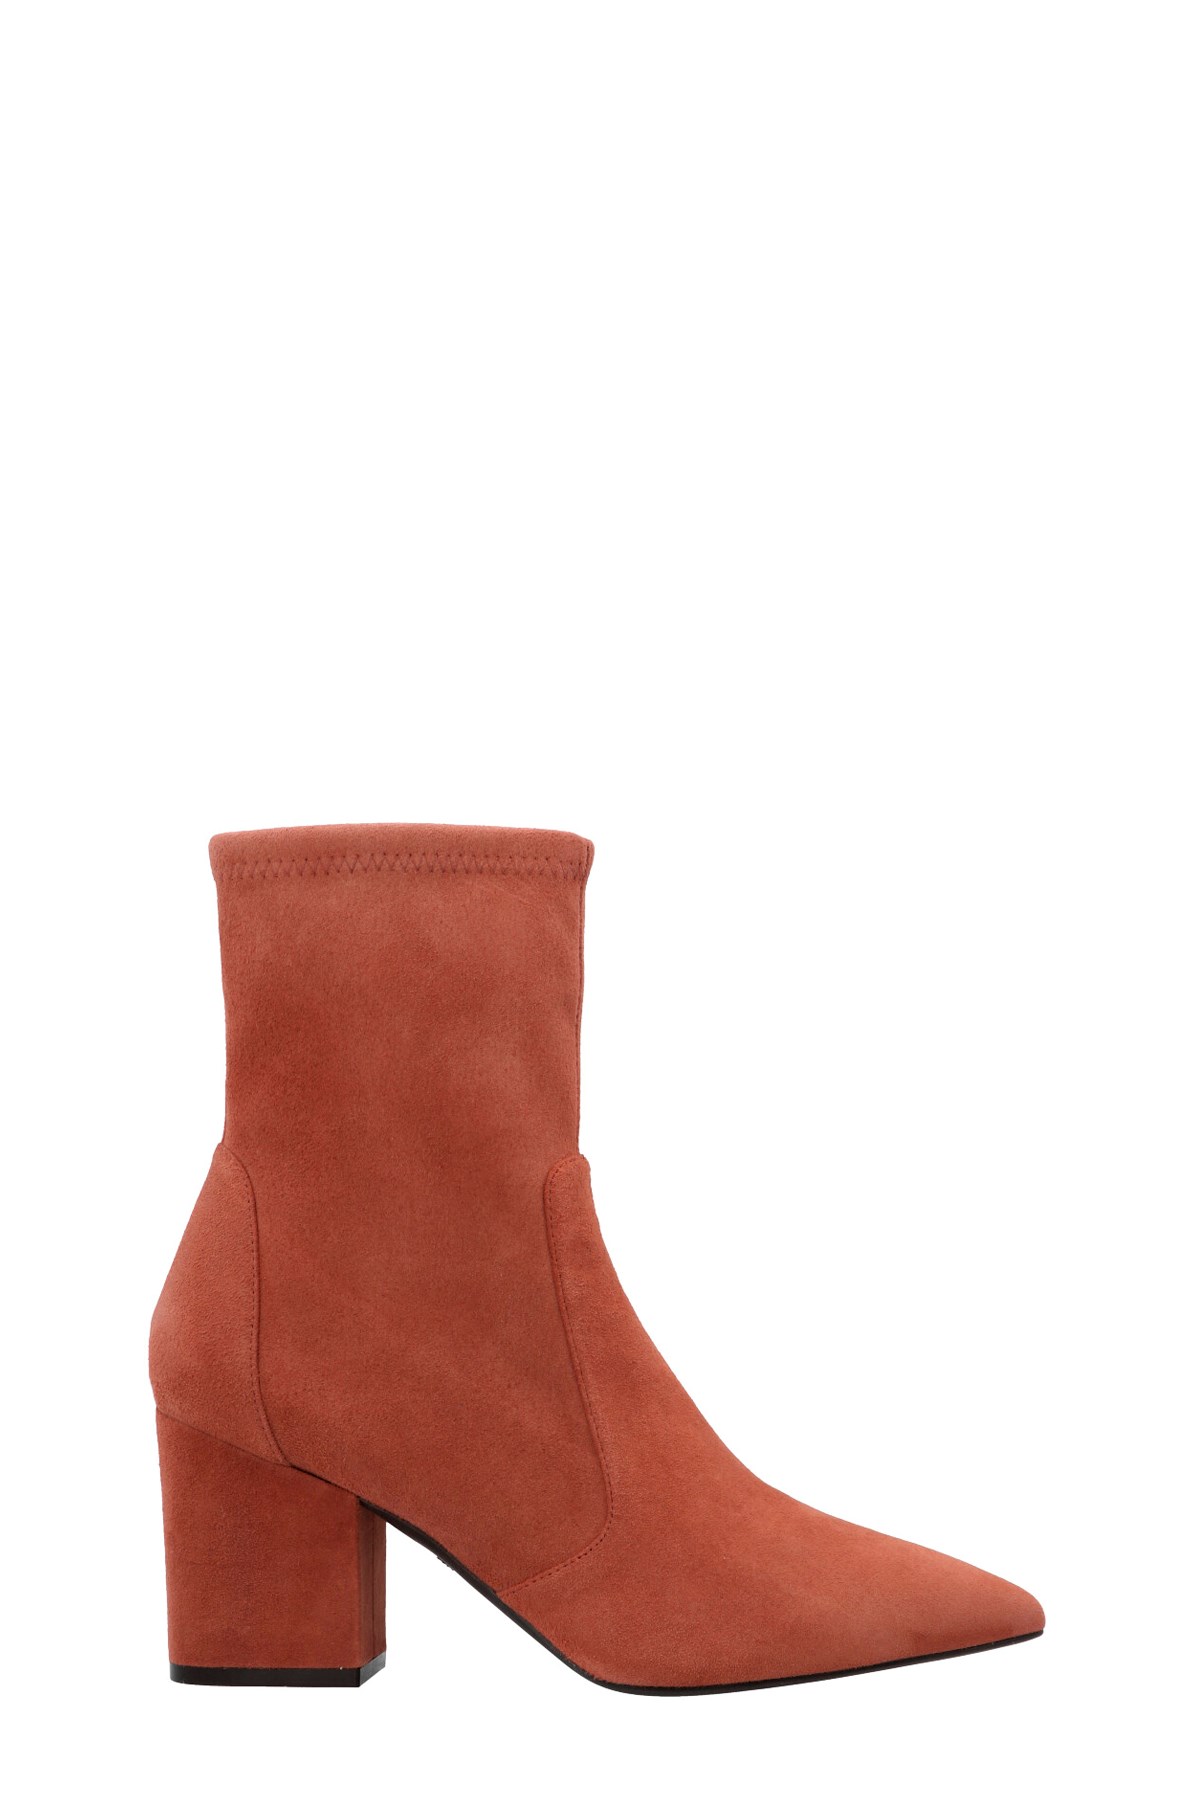 STUART WEITZMAN 'Vernell' Ankle Boots